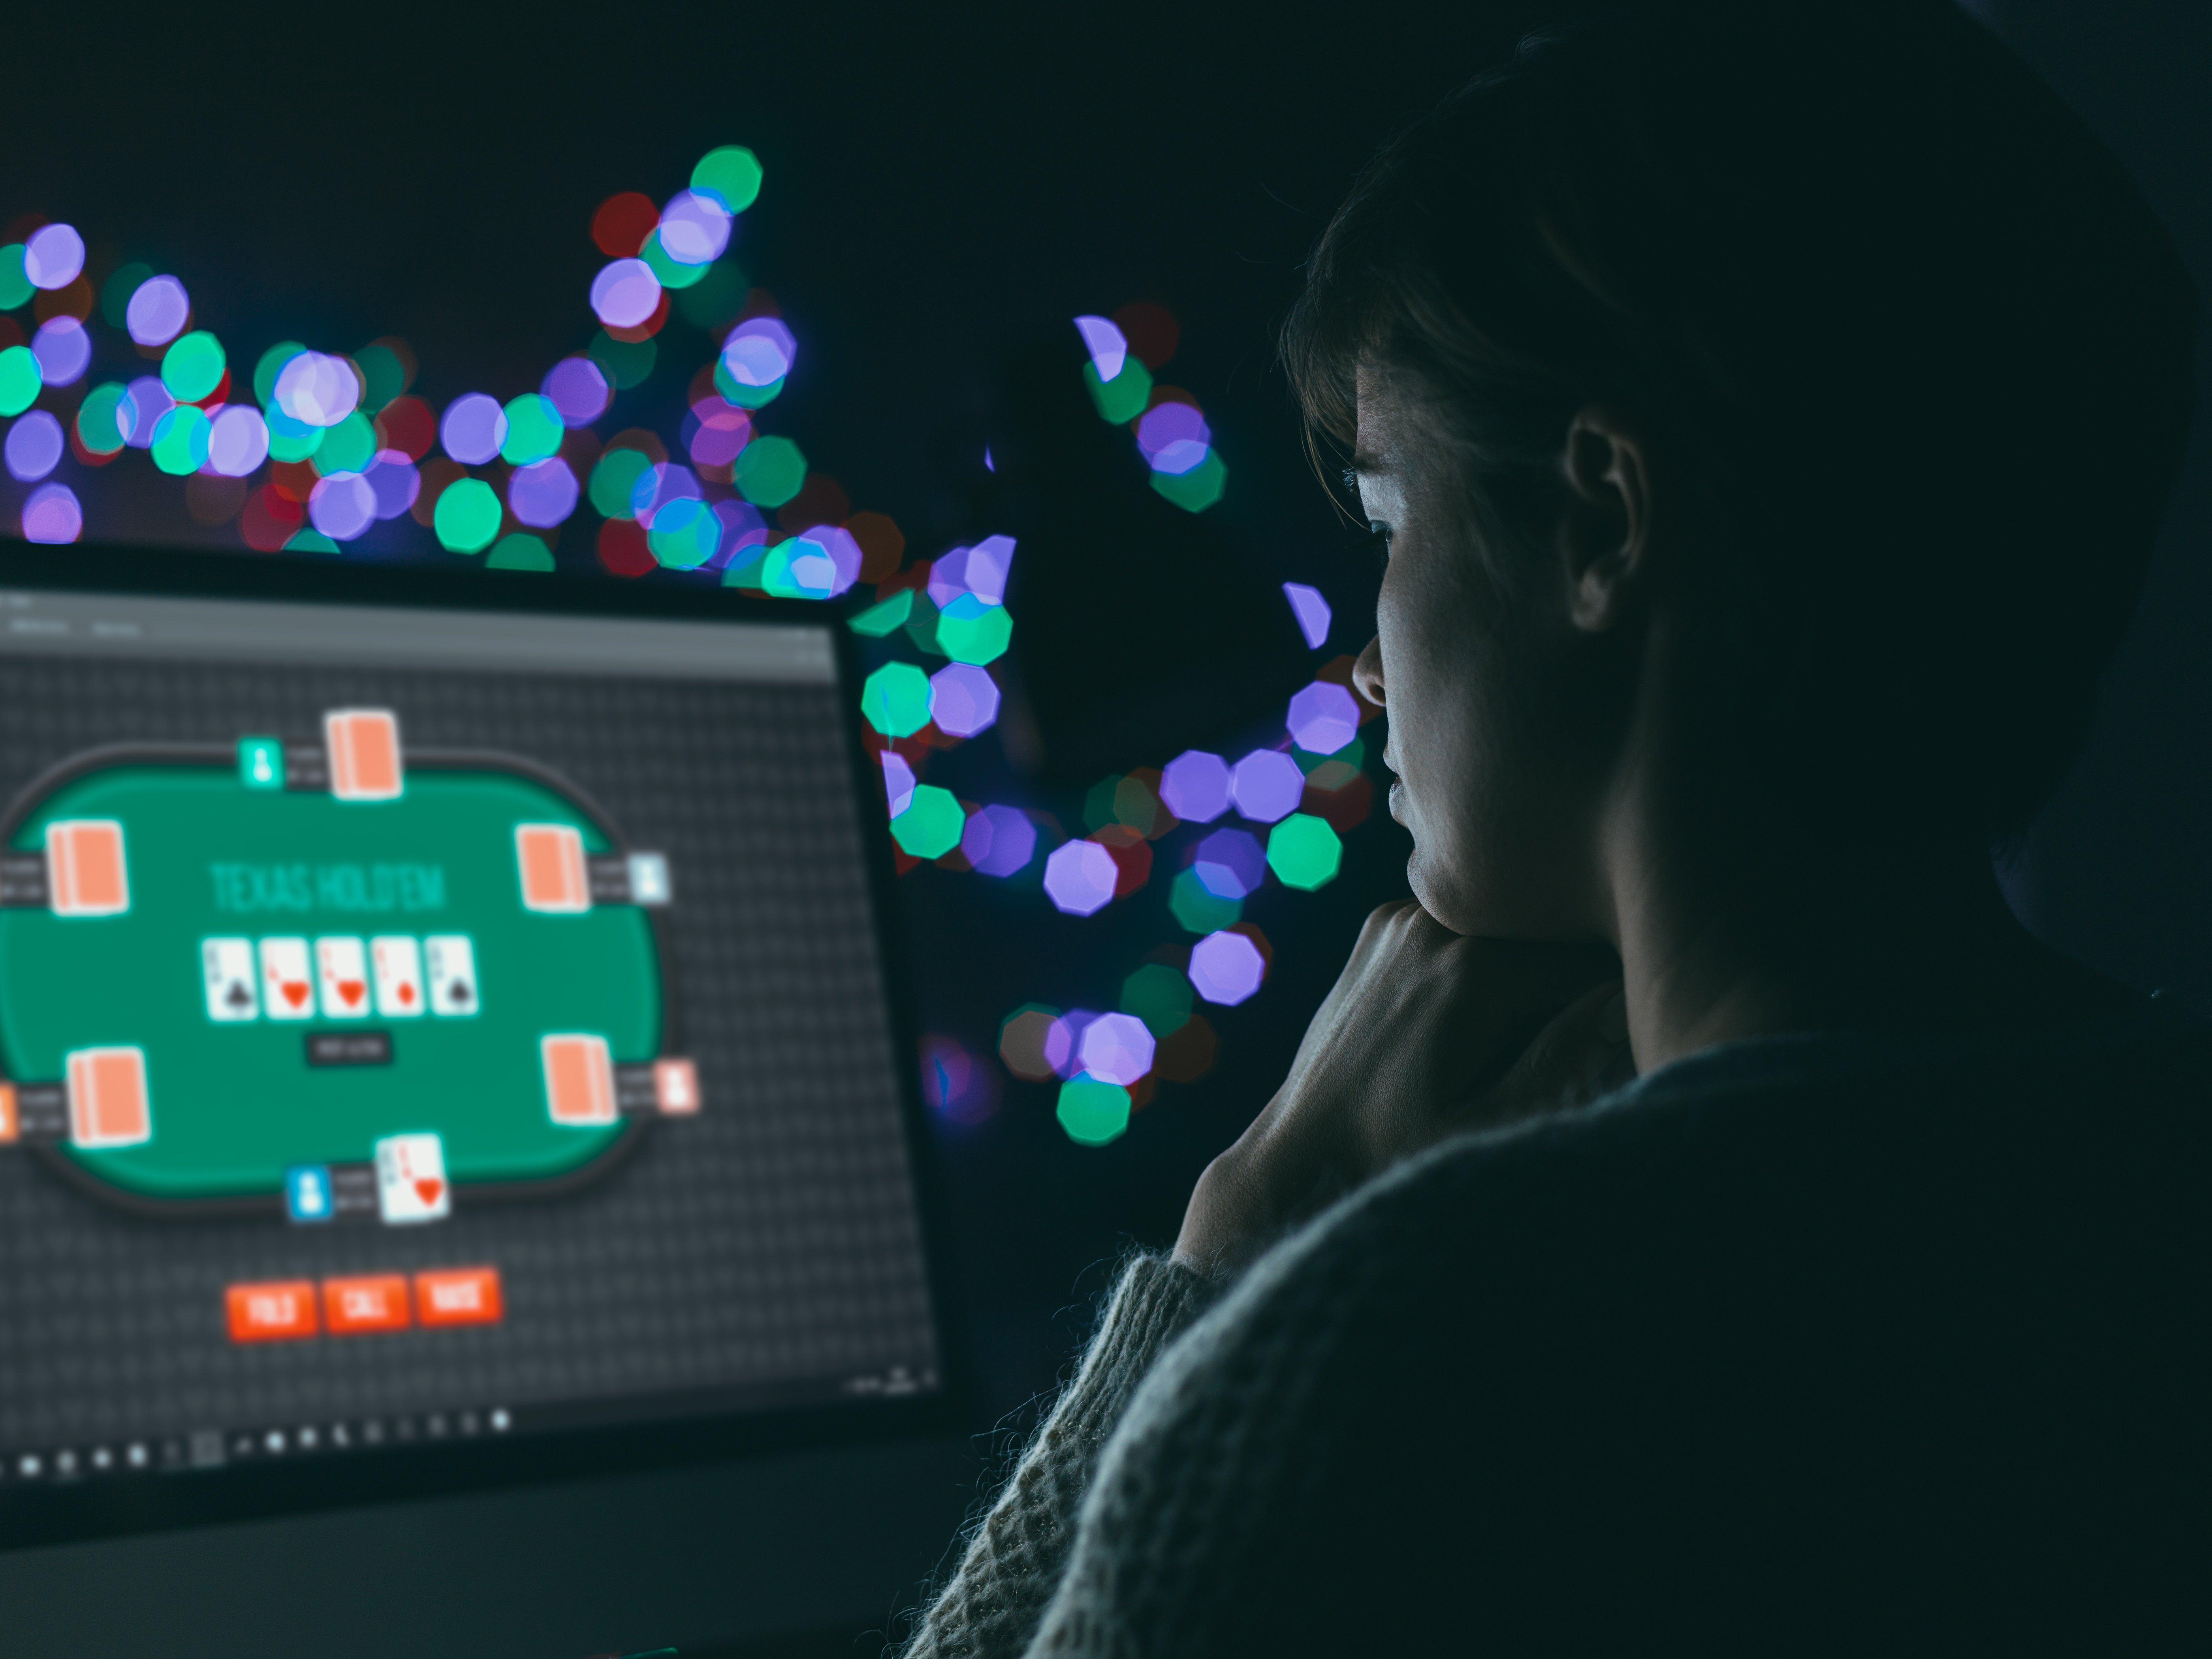 poker free online with friends